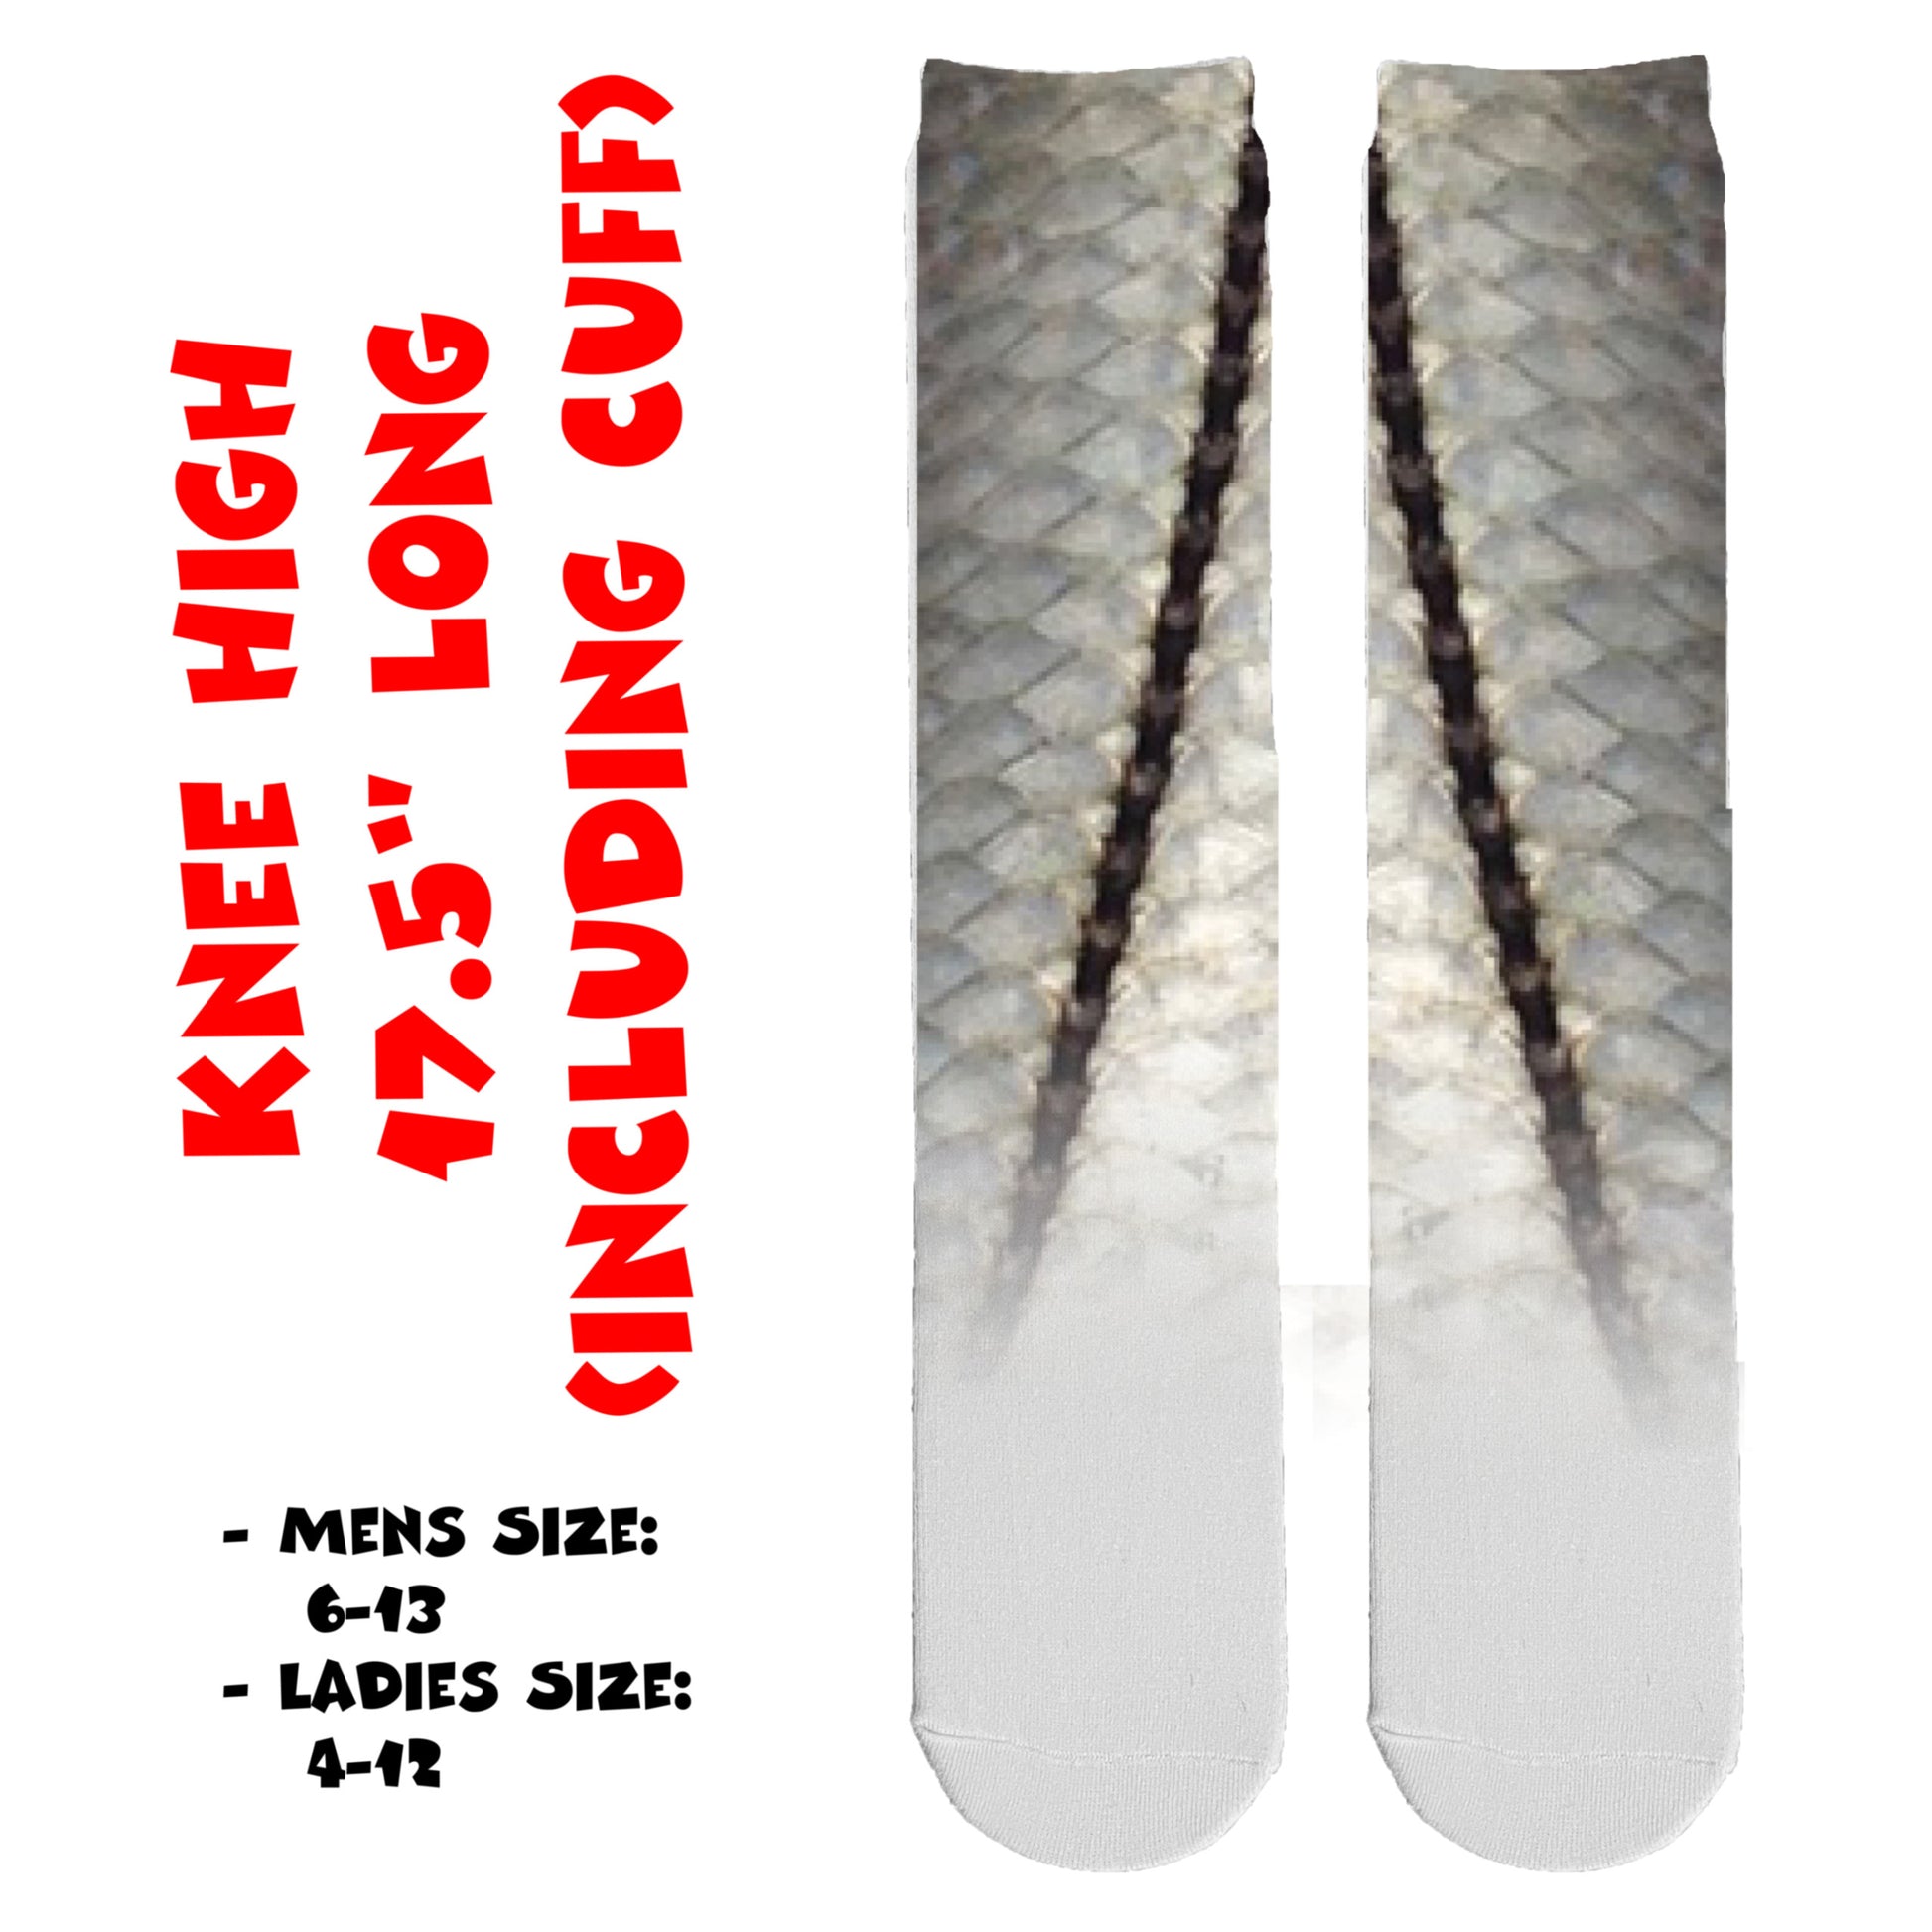 Snook Scale Fishing and Boat Socks - Skiff Life